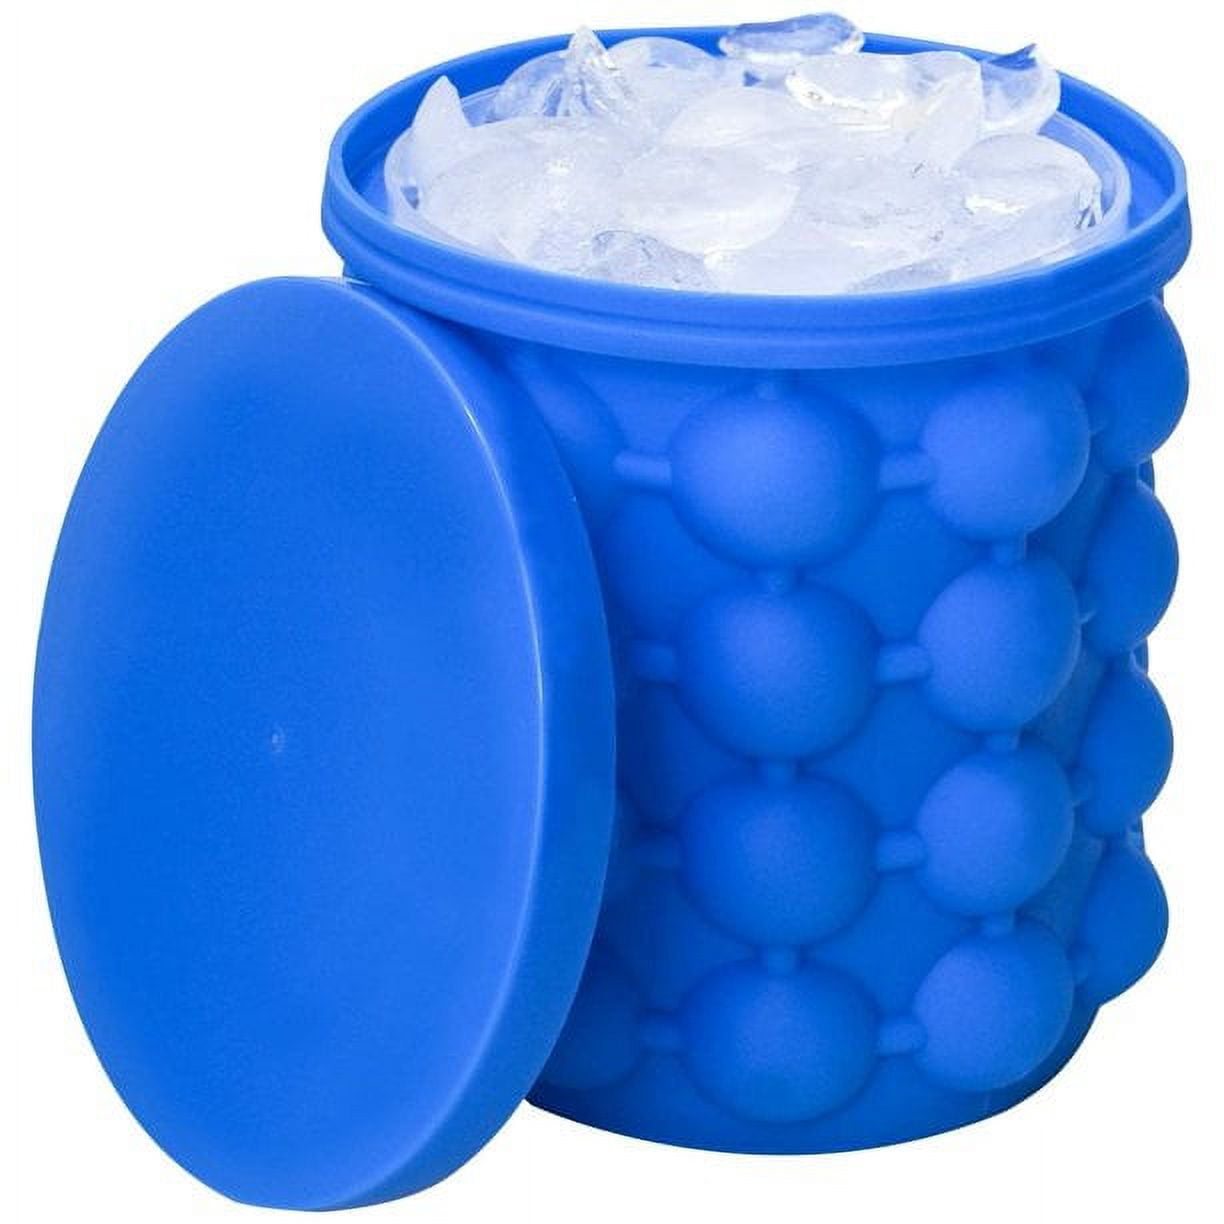 Silicone Ice Bucket Cup Mold For Making Ice Cubes Tray Freeze Quickly  Food-grade Creative Design Ice Bucket Frozen Drink Tools - Ice Cream Tools  - AliExpress